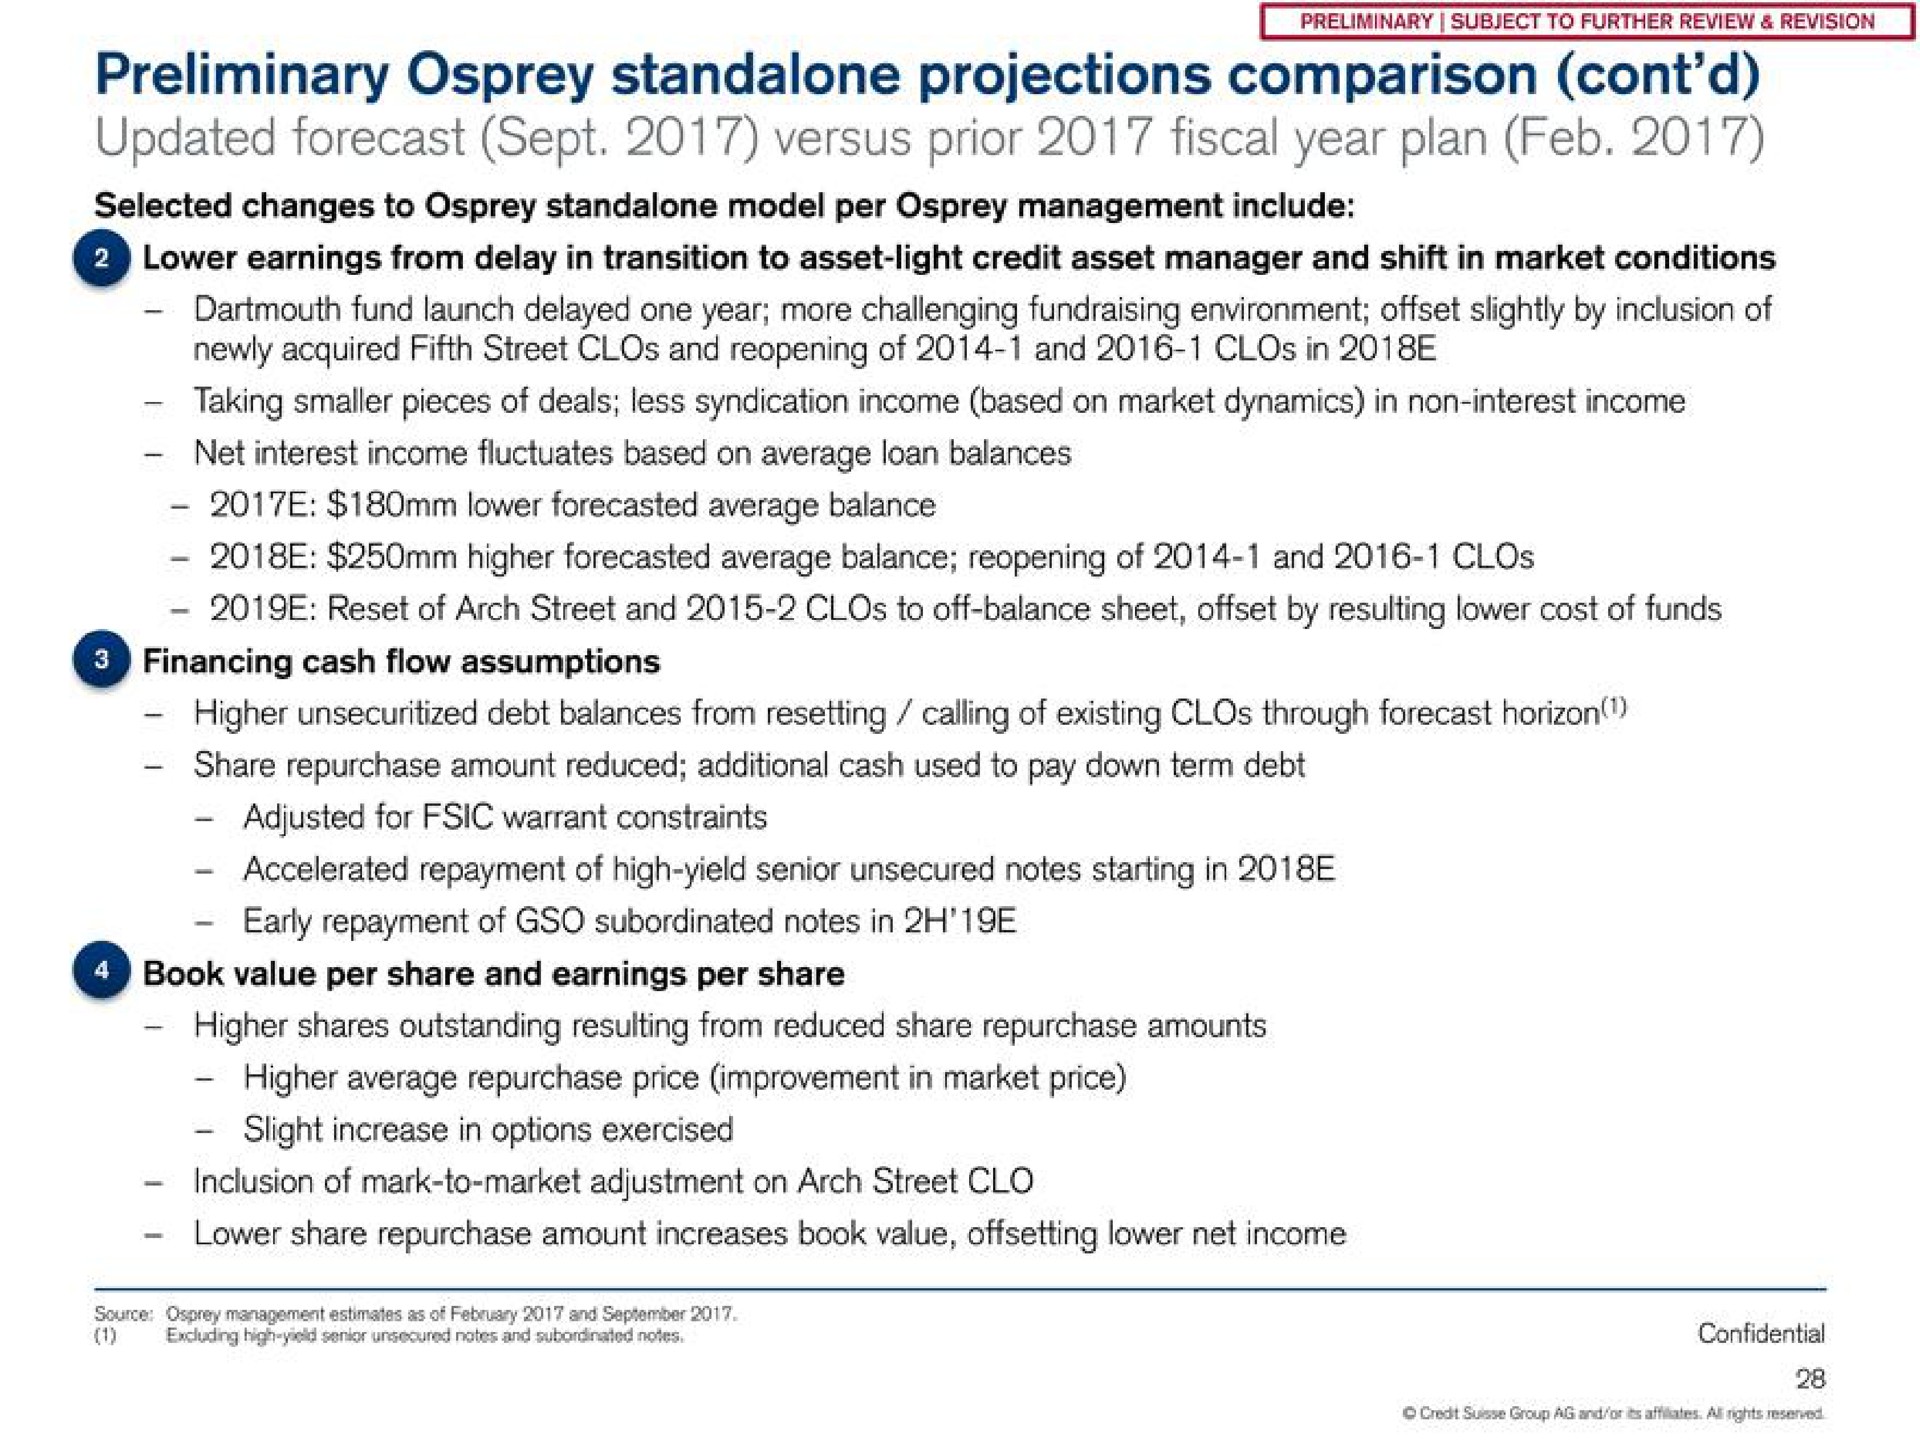 preliminary osprey projections comparison updated forecast sept versus prior fiscal year plan | Credit Suisse